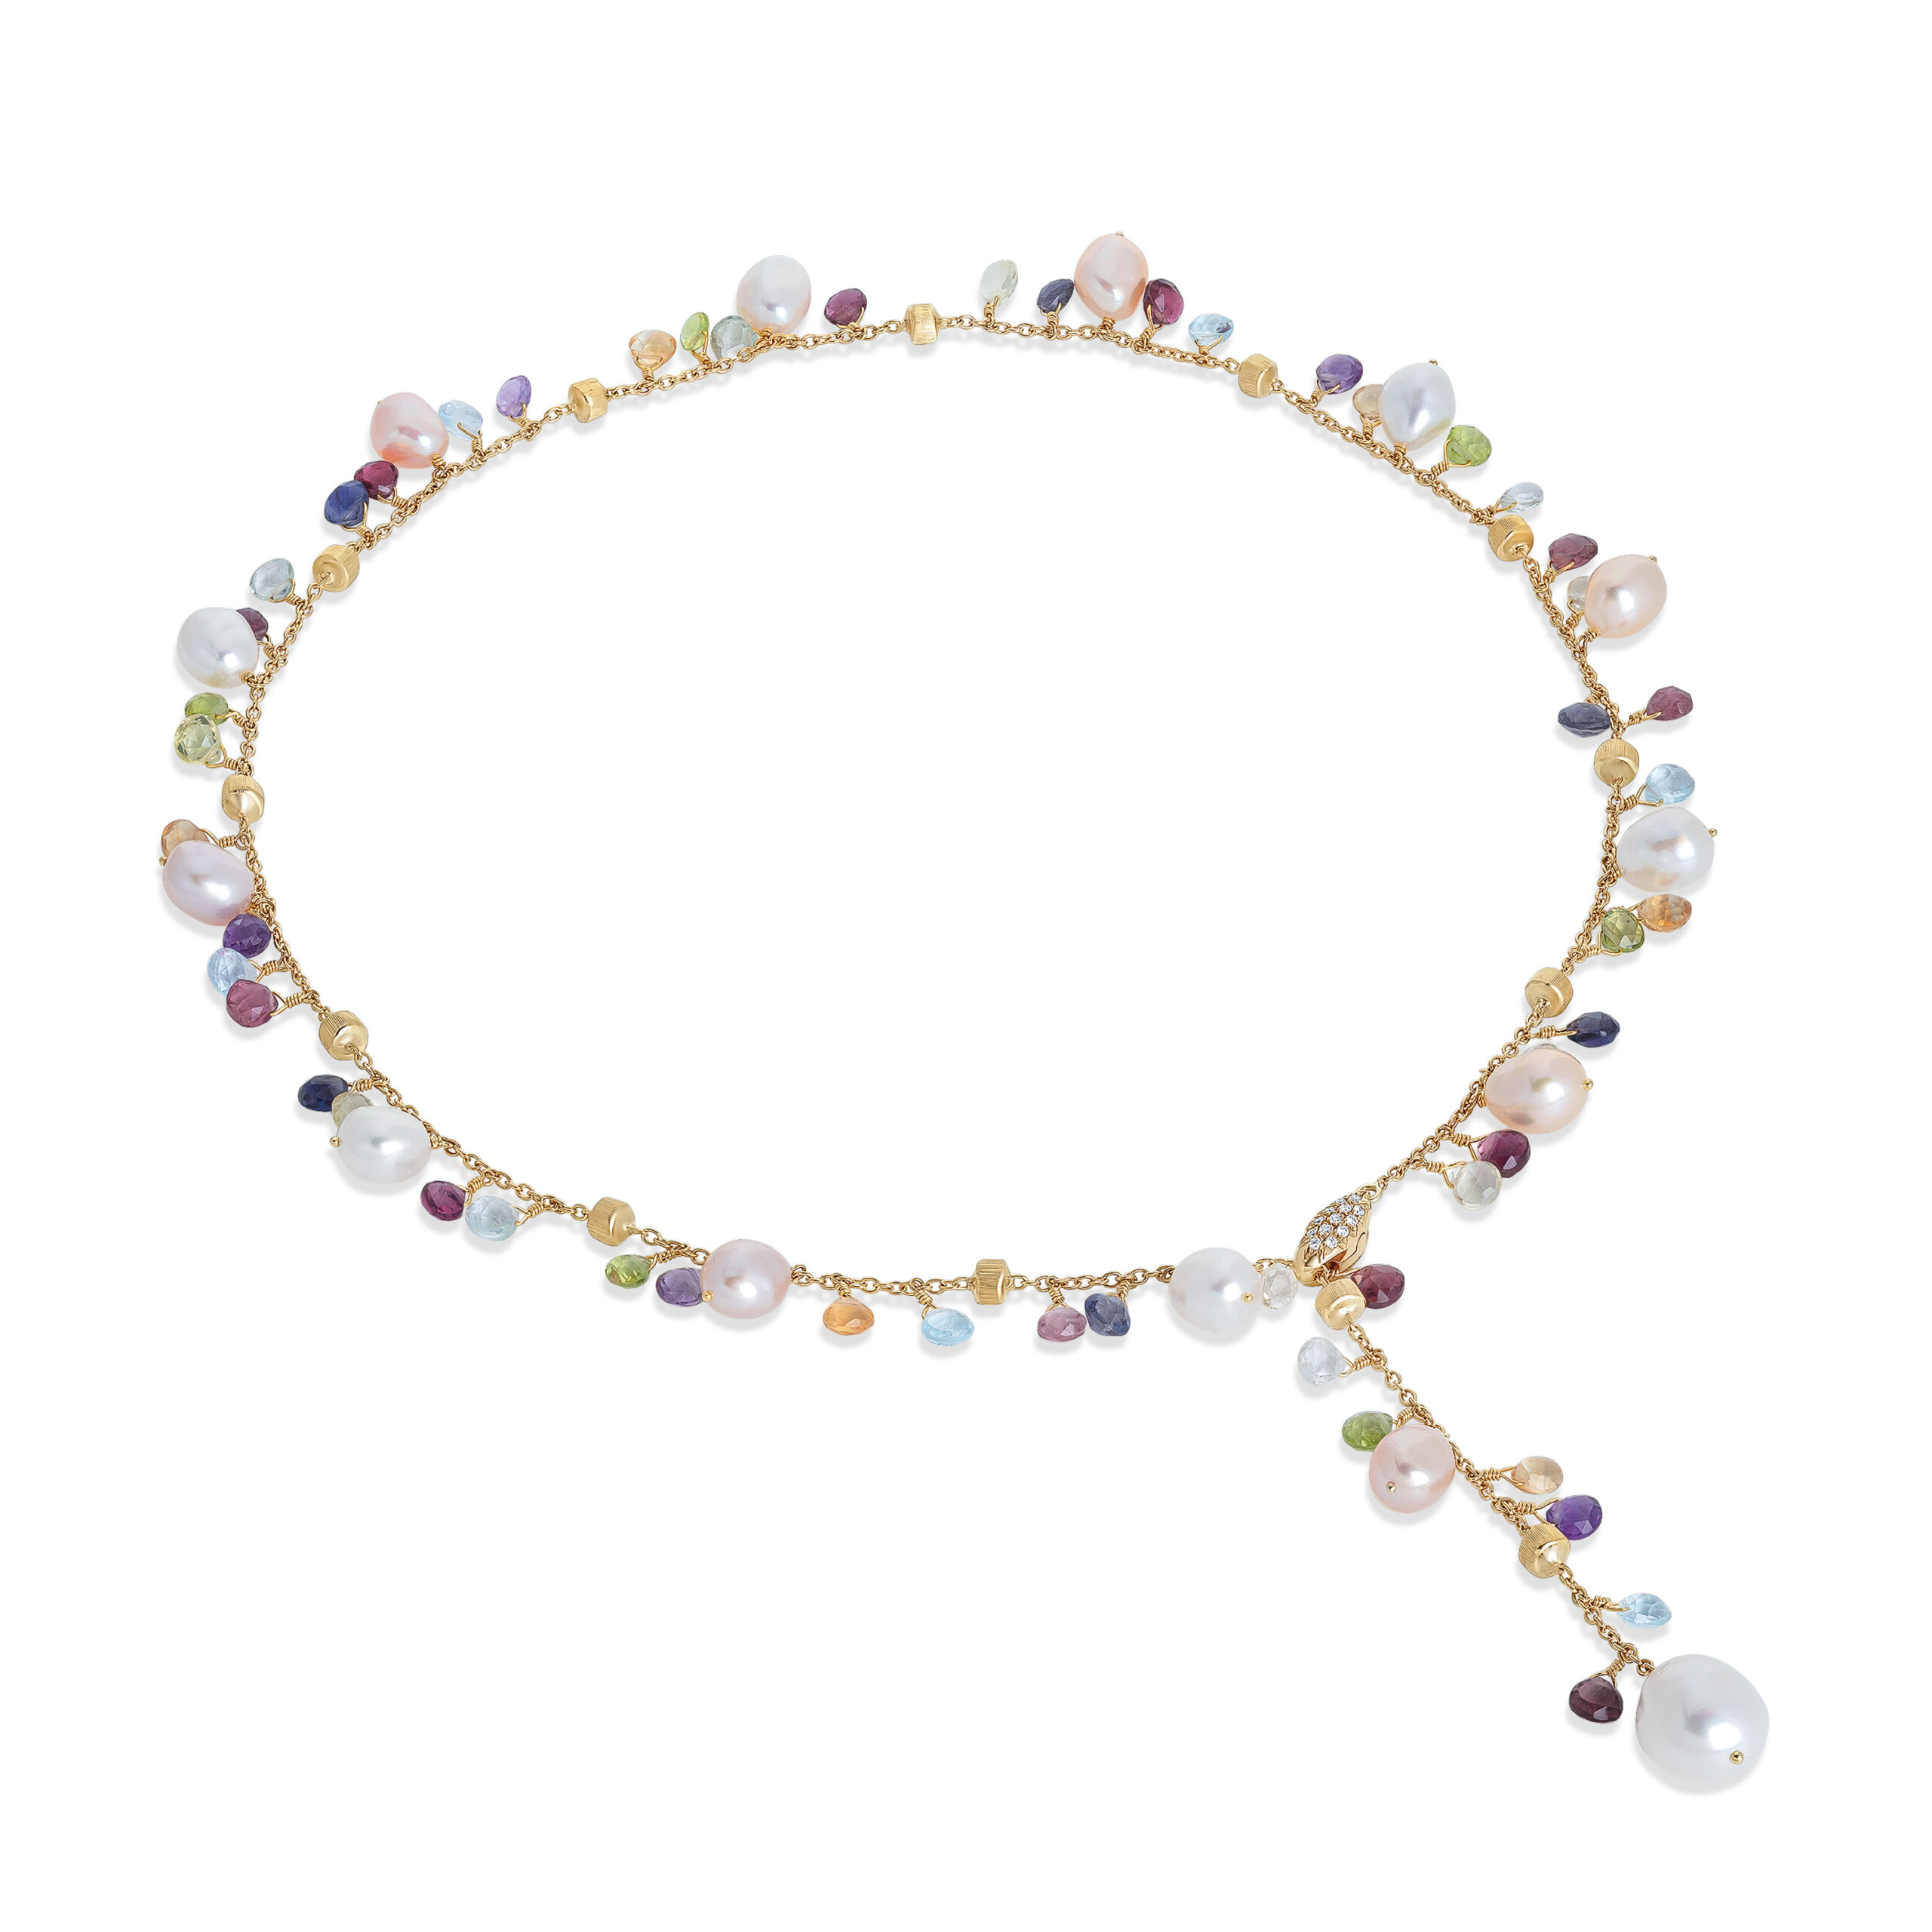 CB2586-B MIX114 Y 02Marco Bicego Paradise Collection 18k Yellow Gold Mixed Gemstone and Pearl Lariat Necklace